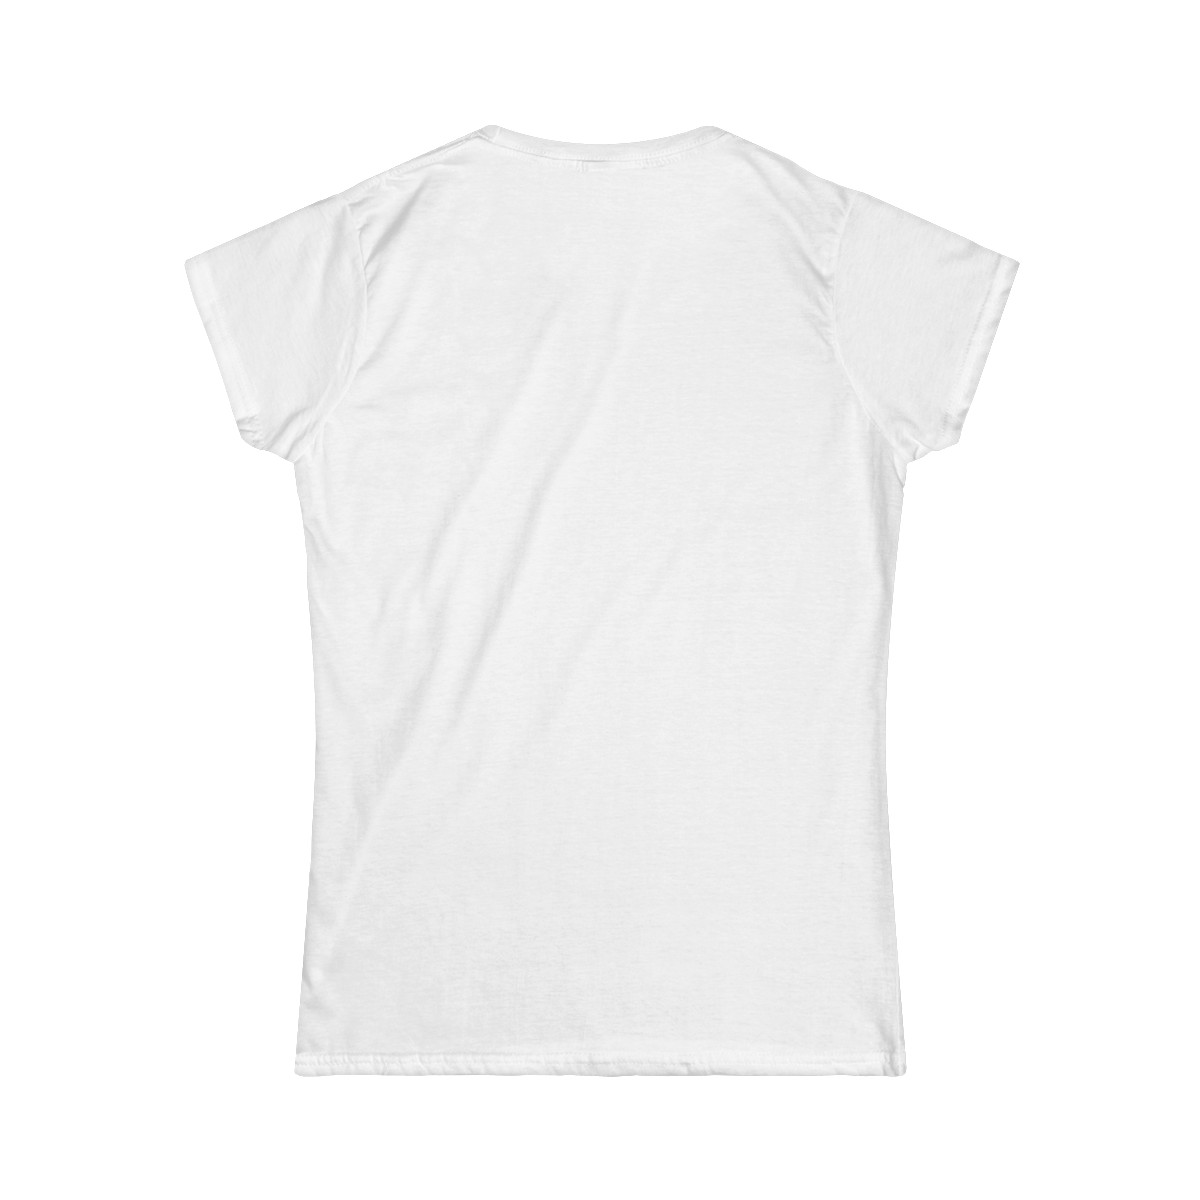 ABA All Day - Women's Softstyle Tee product thumbnail image